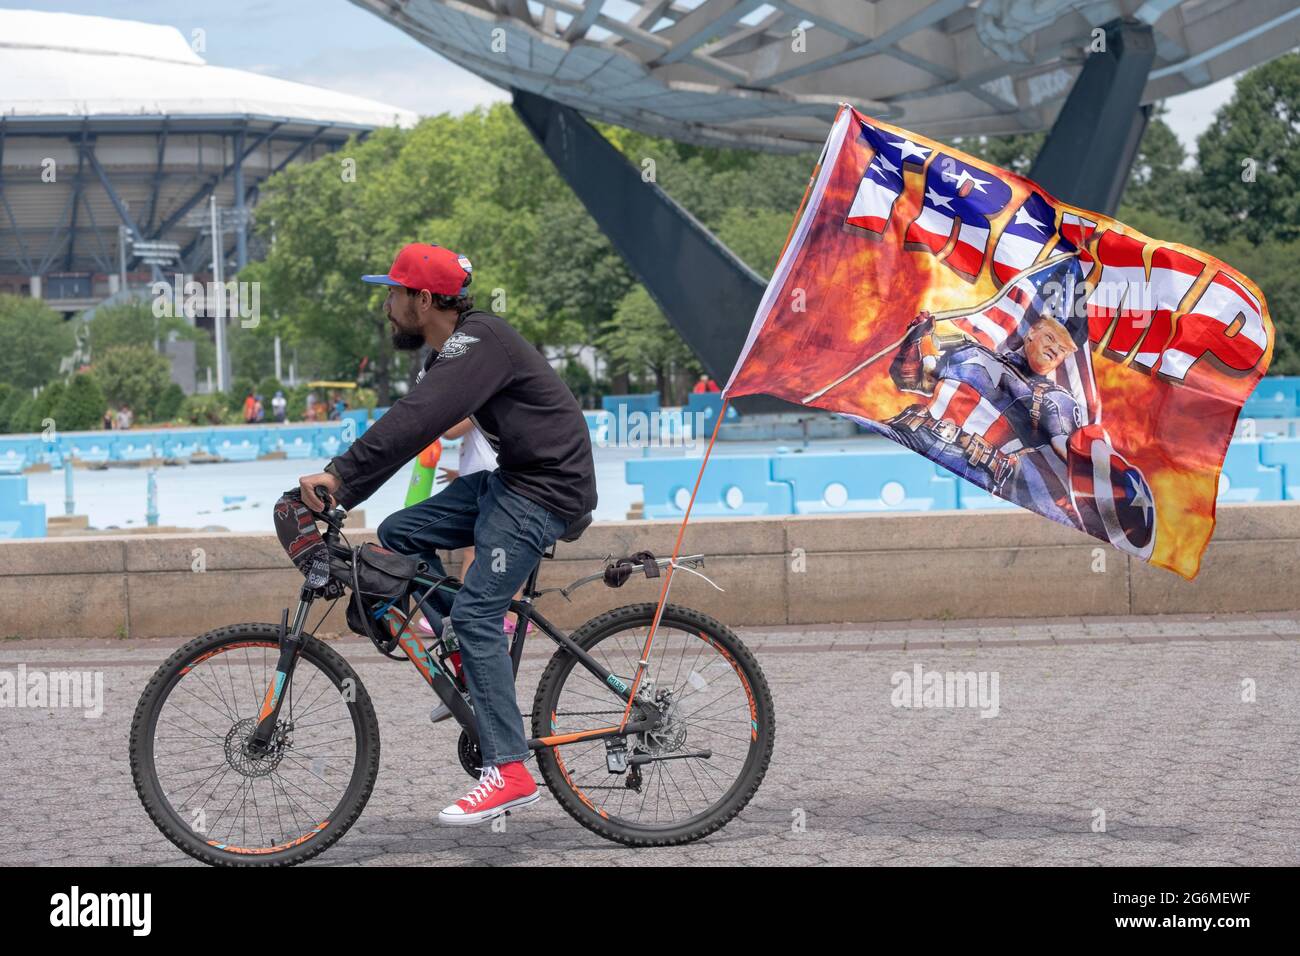 A Dominican American Trump supporter rides his bike displaying a large Trump banner. Near the Unisphere in Flushing Meadows, Queens, New York City. Stock Photo